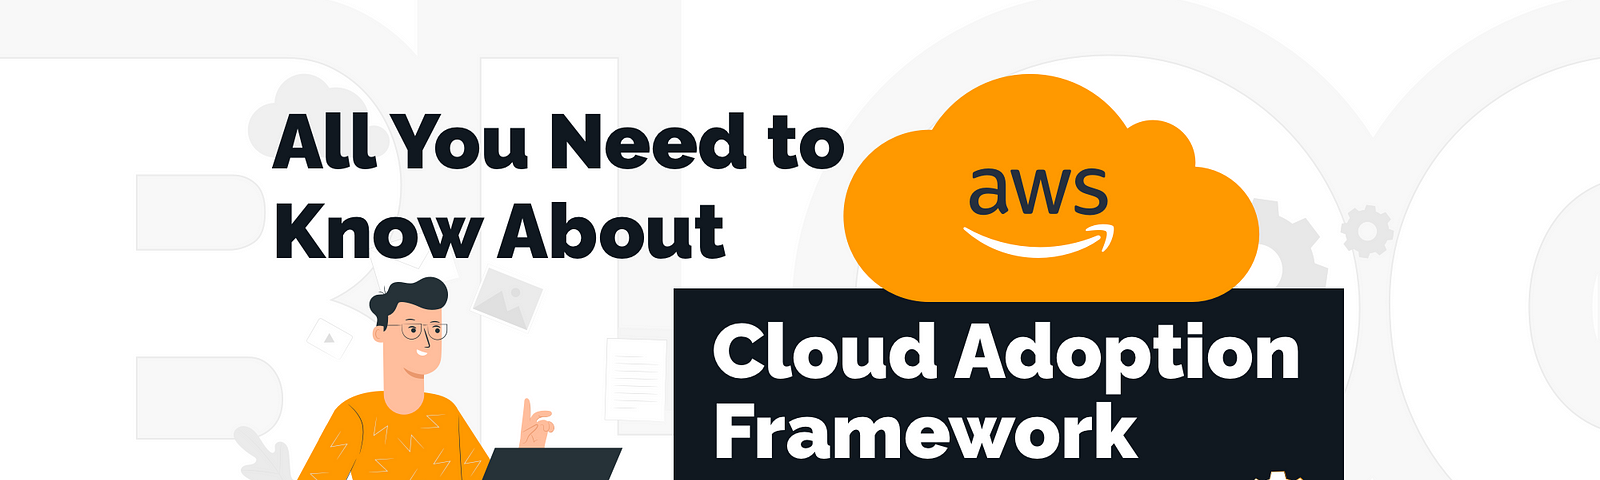 What Is an AWS CAF? An Overview of the AWS Cloud Adoption Framework | TechMagic